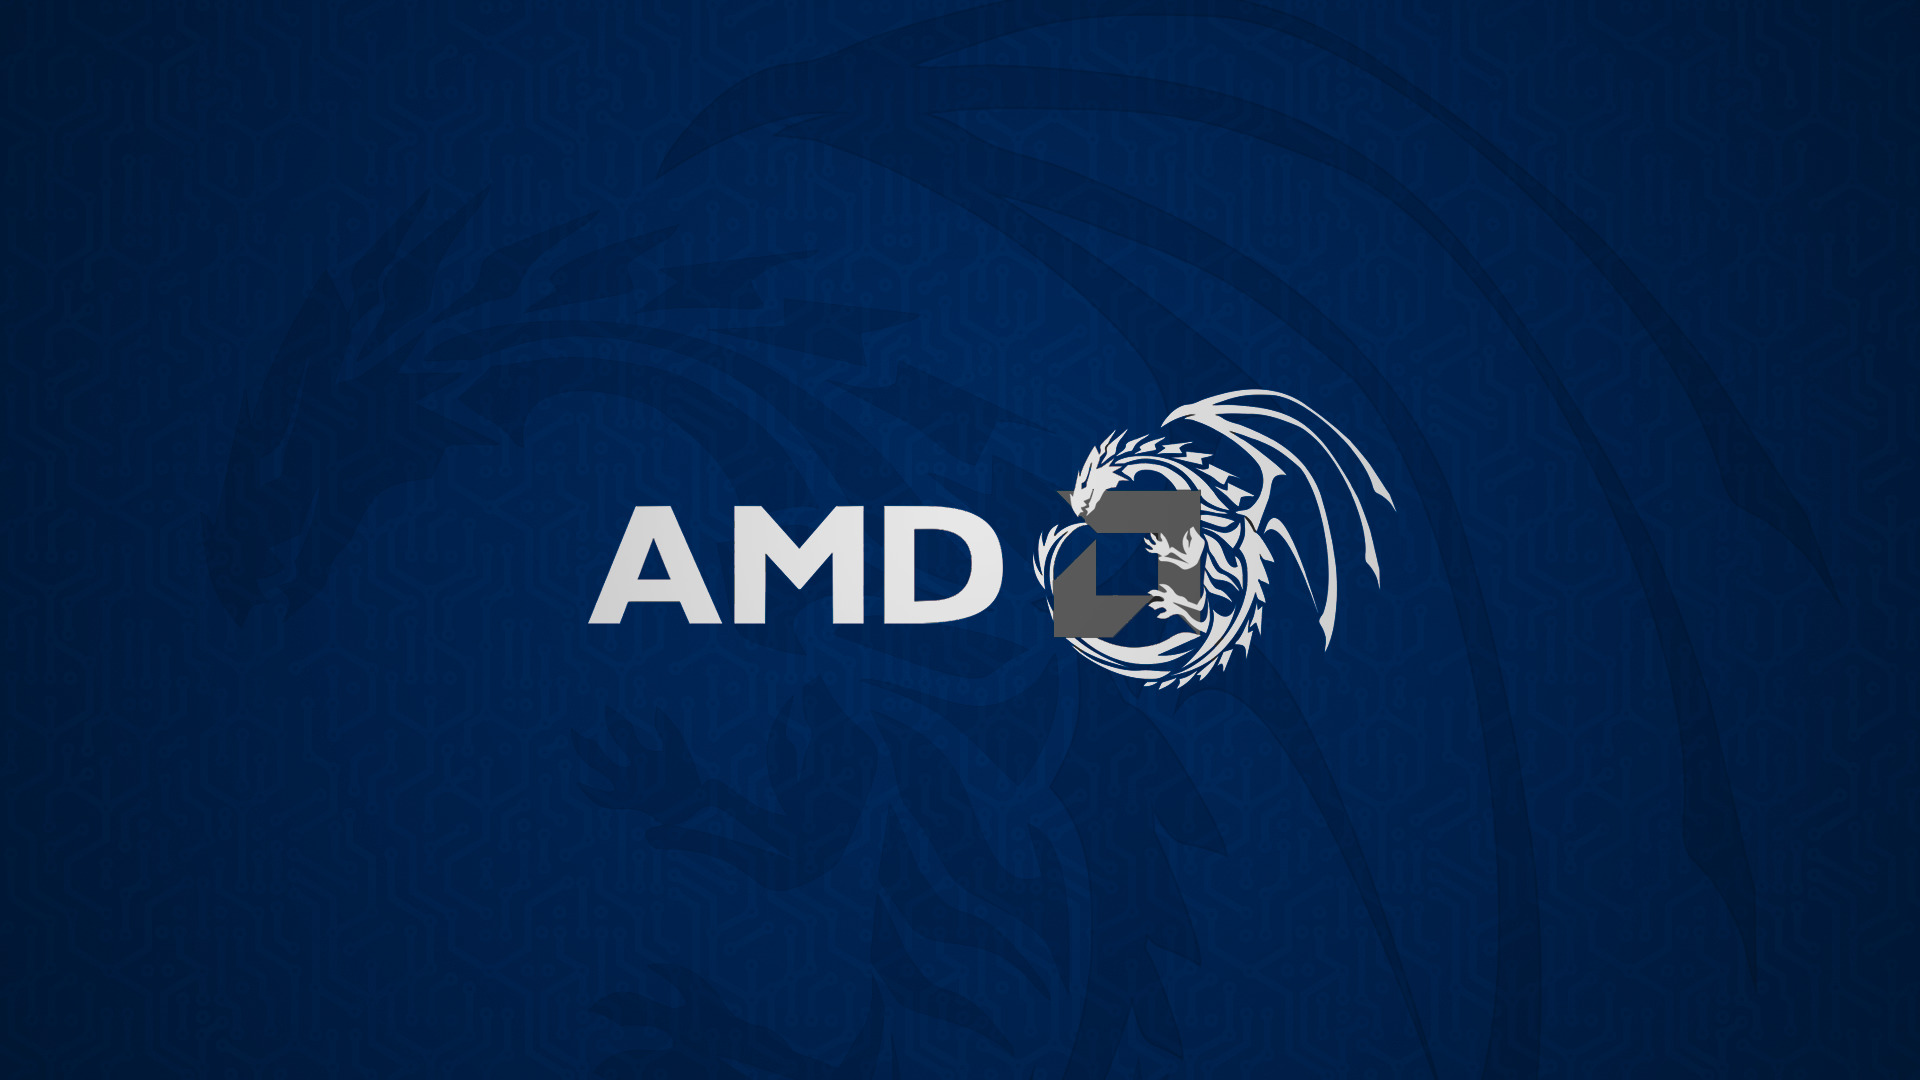 Amd Blue Dragon Wallpapers Hd Desktop And Mobile Backgrounds